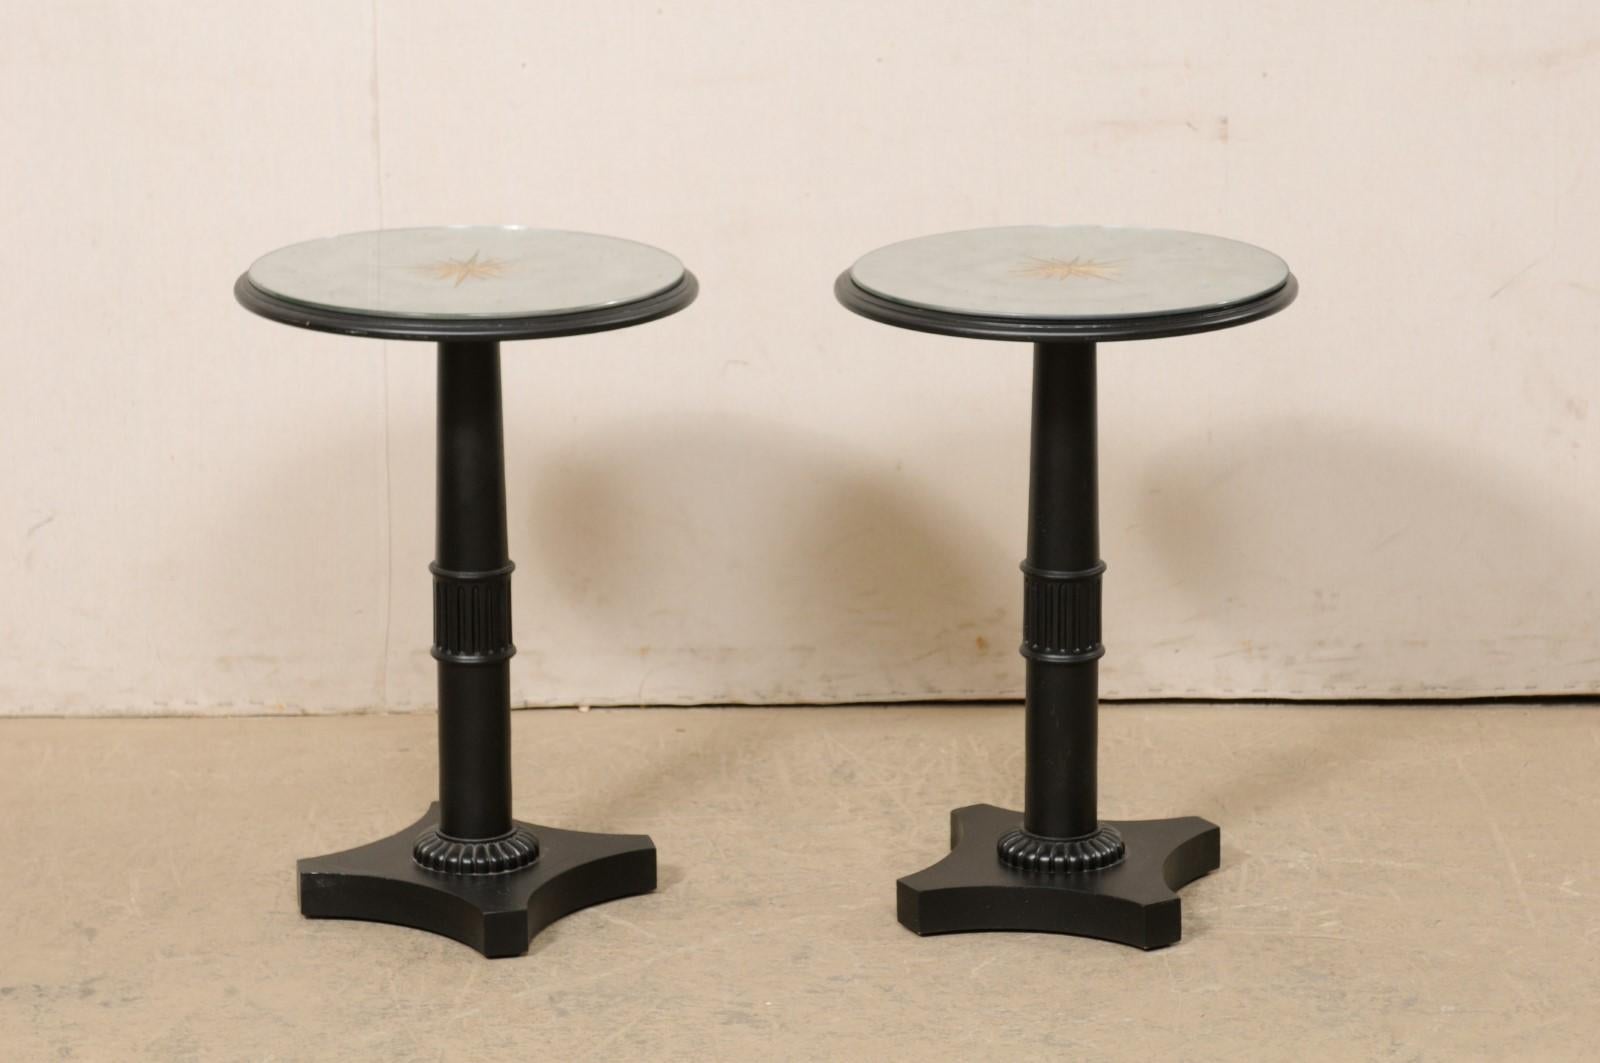 A French pair of wooden pedestal table bases which have been topped with new, artisan crafted, round mirror tops. This vintage pair of side tables from France each feature a rounded pedestal, with a fluted banding accent mid-way up the pedestal,